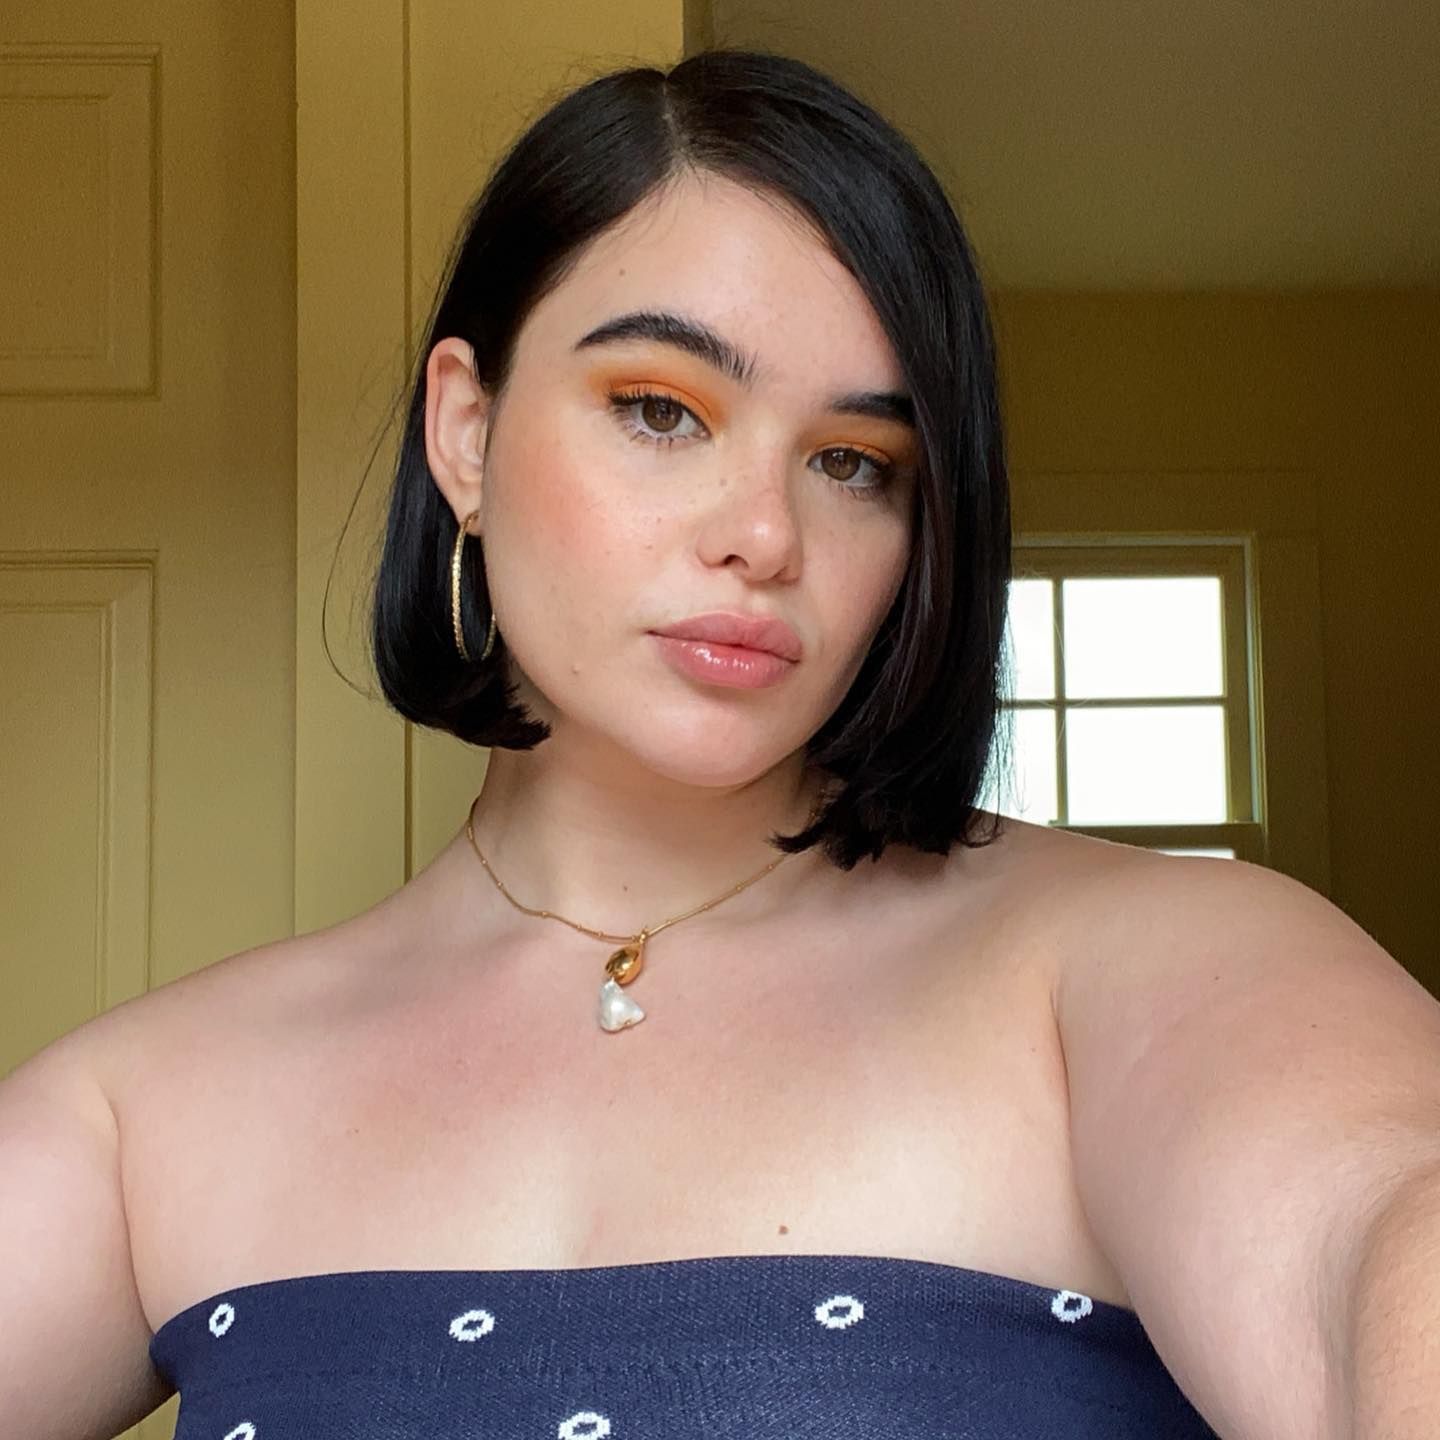 Barbie Ferreira Can't Stop Wearing This Charm Necklace